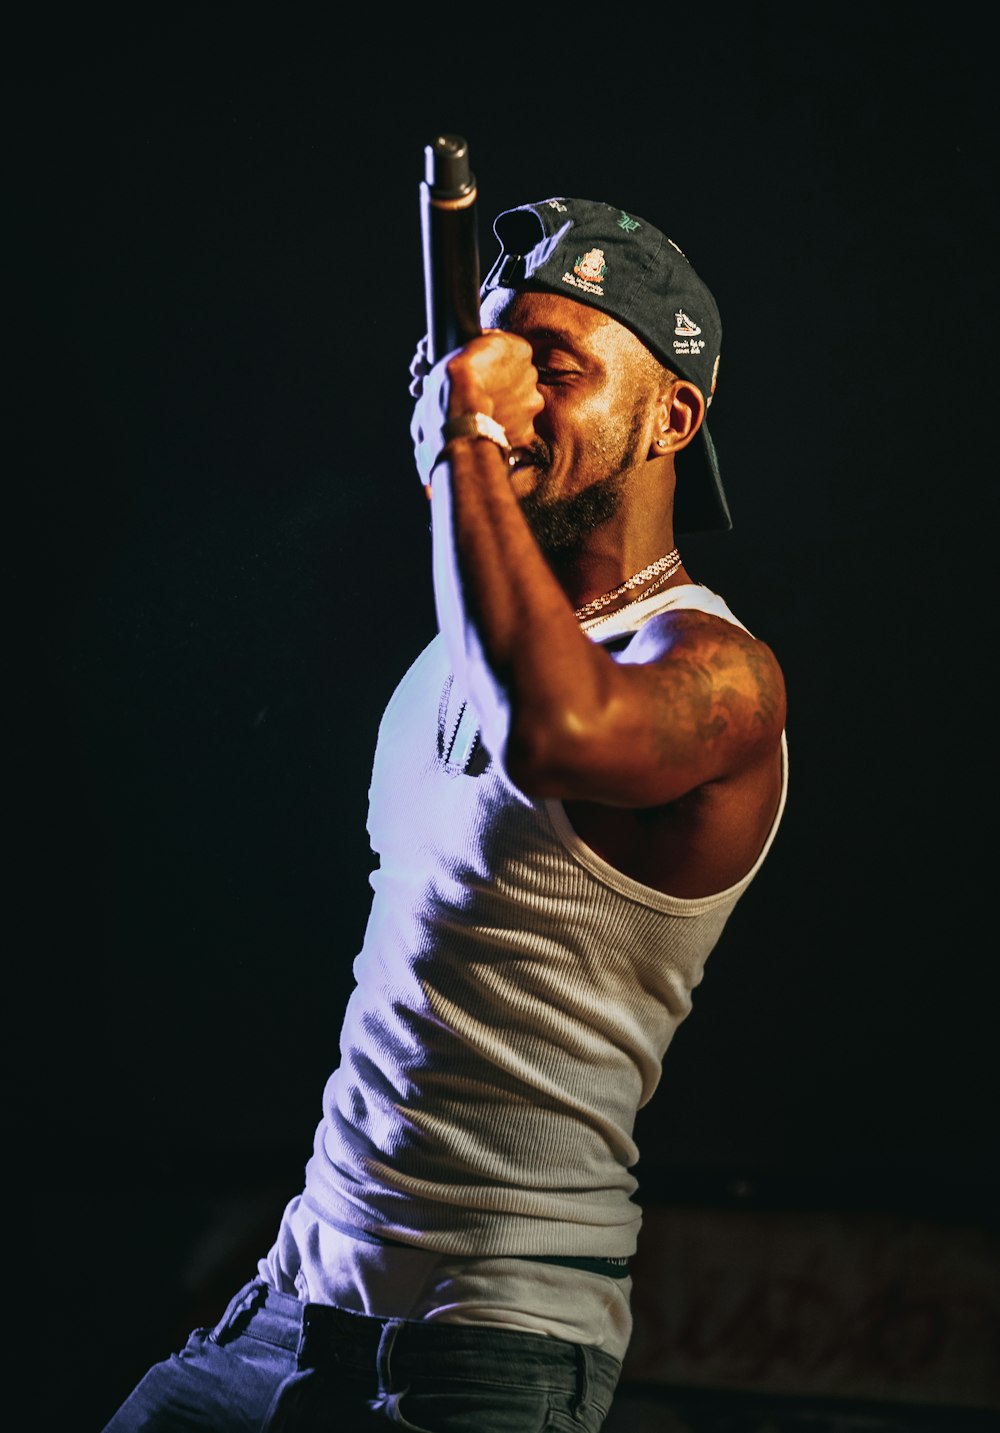 man in white tank top and gray cap holding microphone